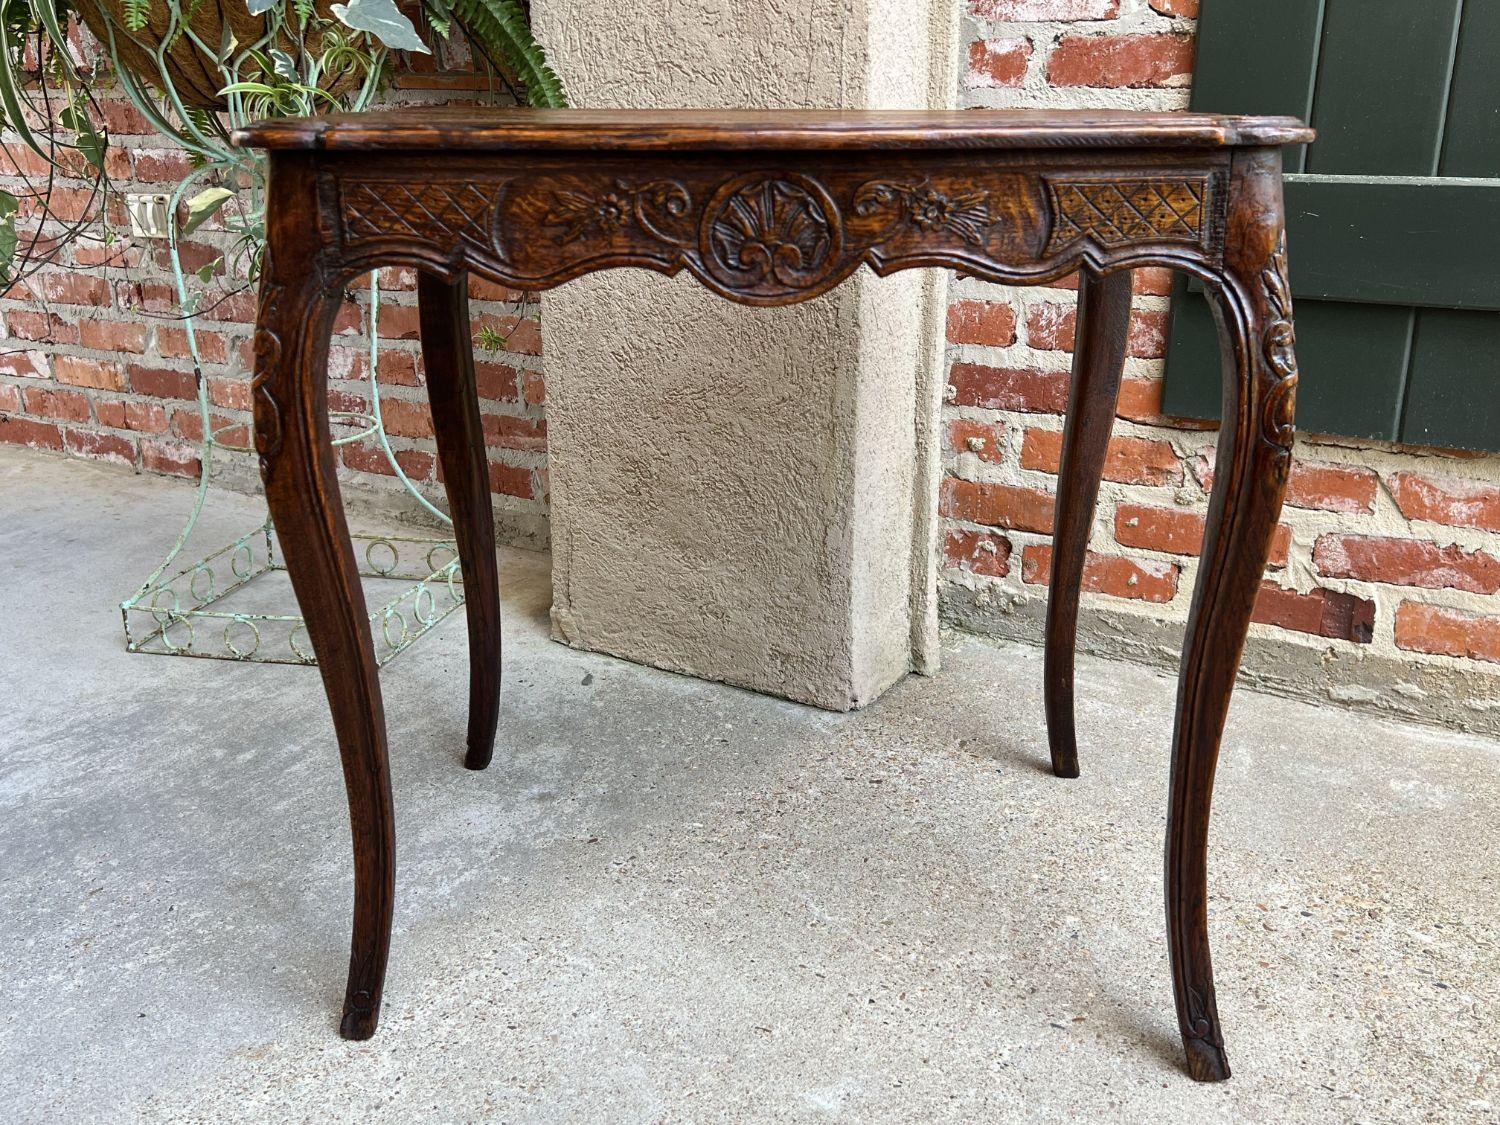 Antique French carved oak sofa side lamp table Serpentine Louis XV nightstand.

Direct from France, another lovely carved French side or sofa table with classic French Louis XV style and elegance.
Beveled serpentine edge oak tabletop above the